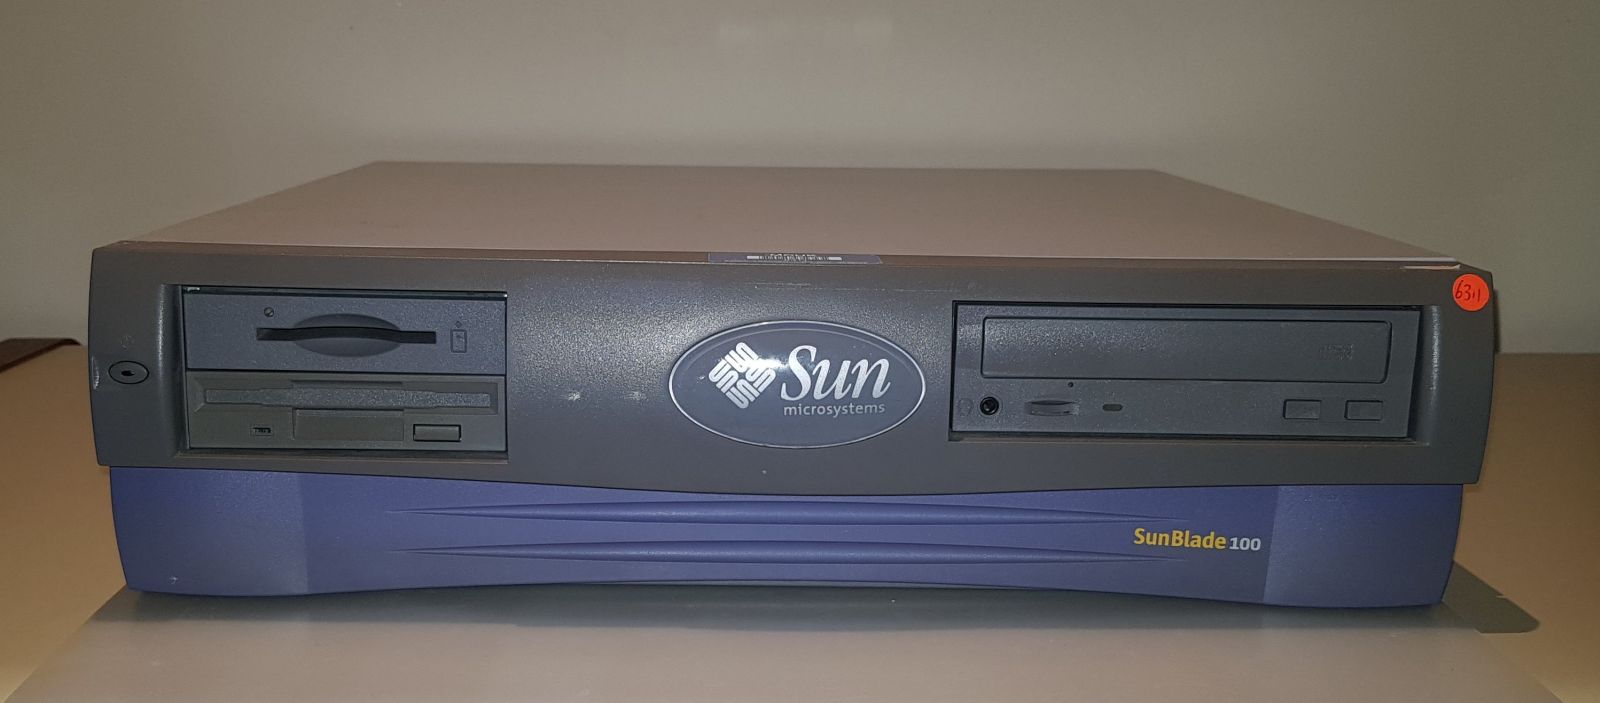 Sun Blade 100 Workstation with 768Mb Memory and Keyboard